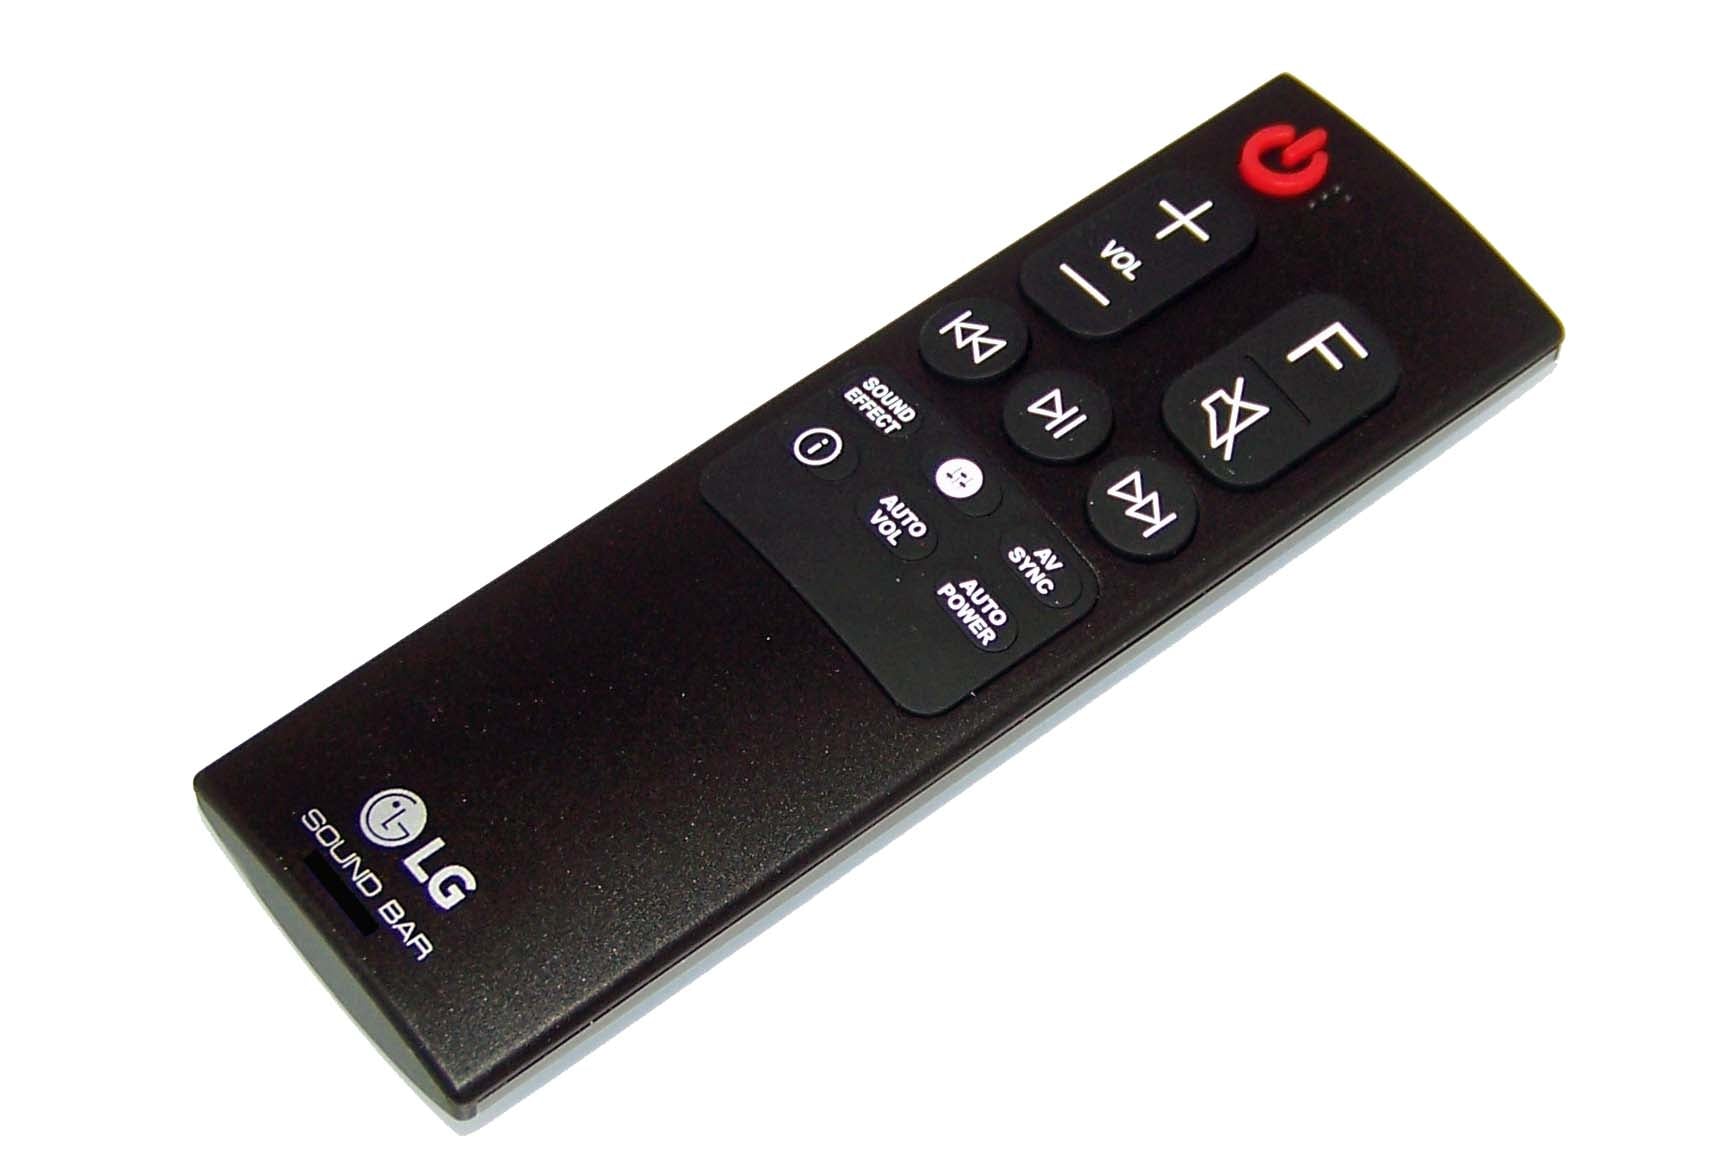 OEM LG Remote Control Shipped With SK9, SKC9